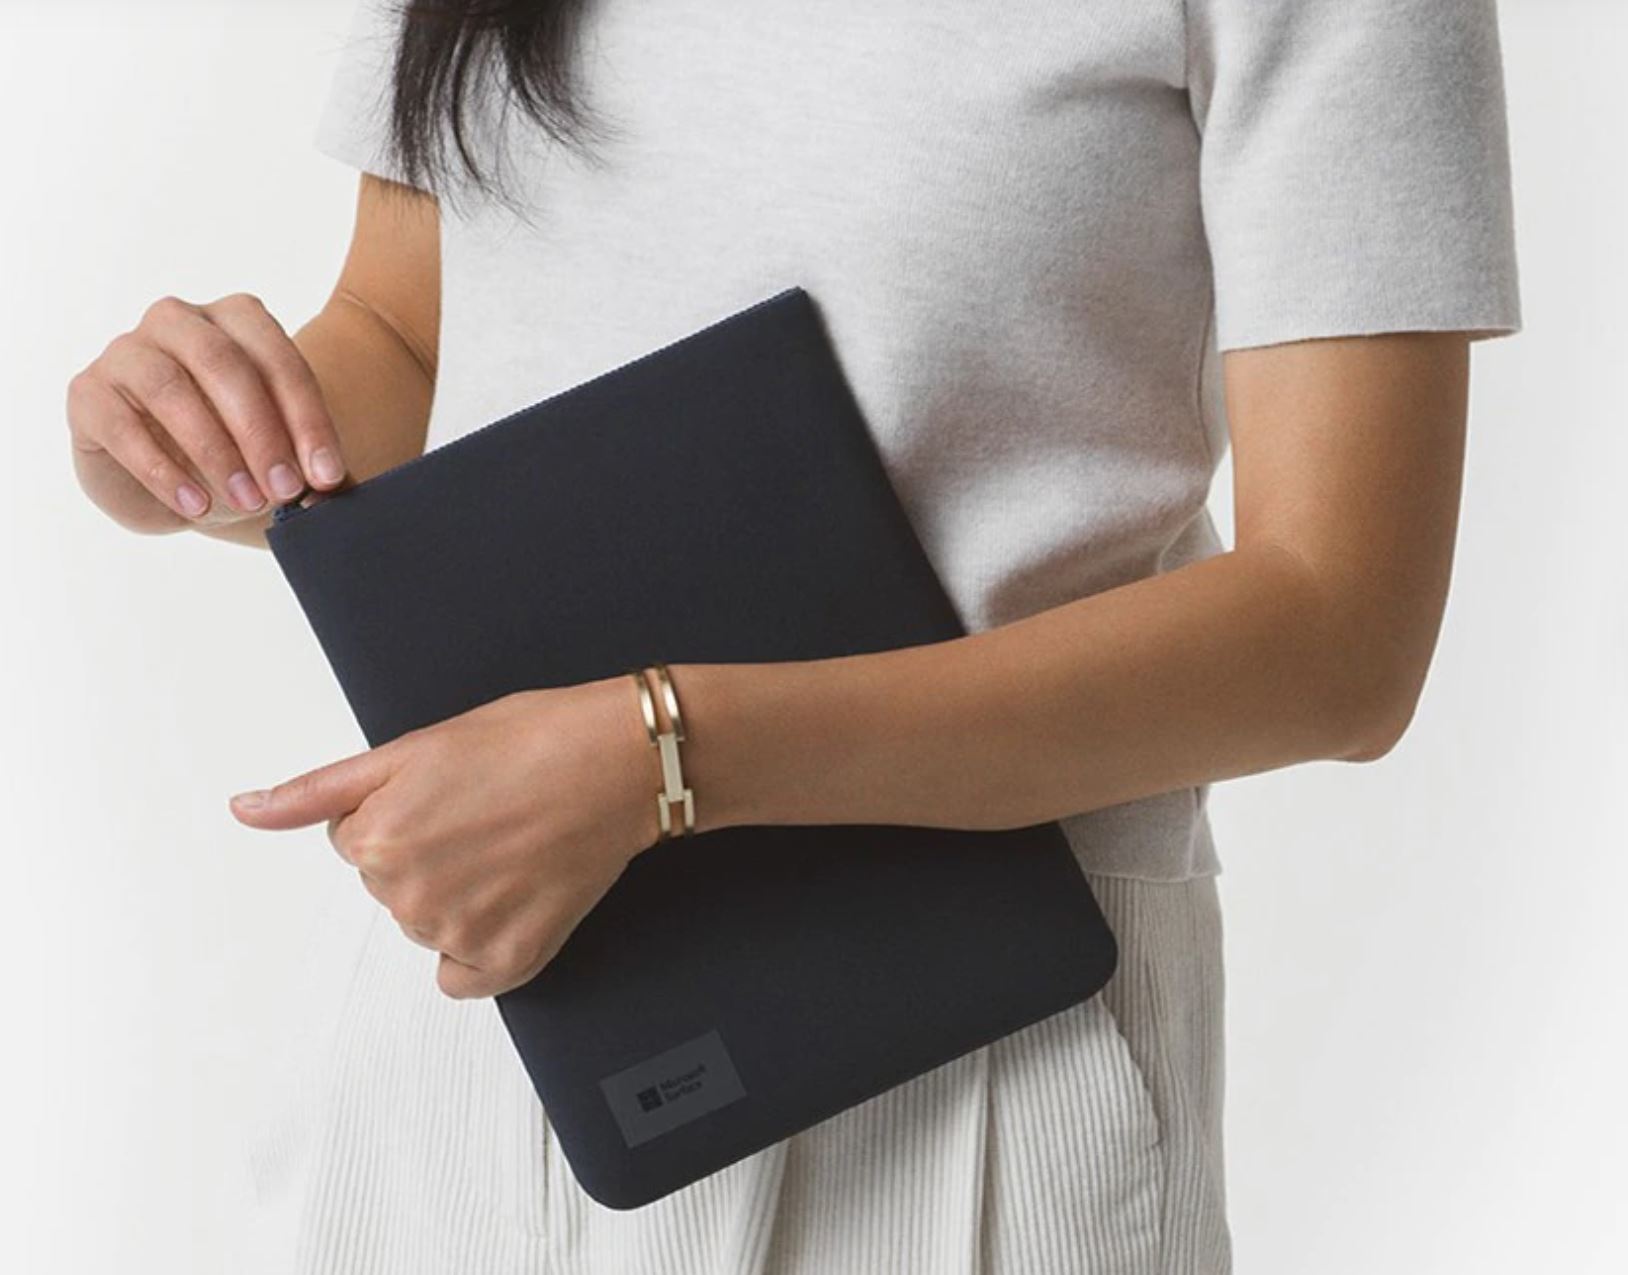 Microsoft now selling an official sleeve for Surface Go devices